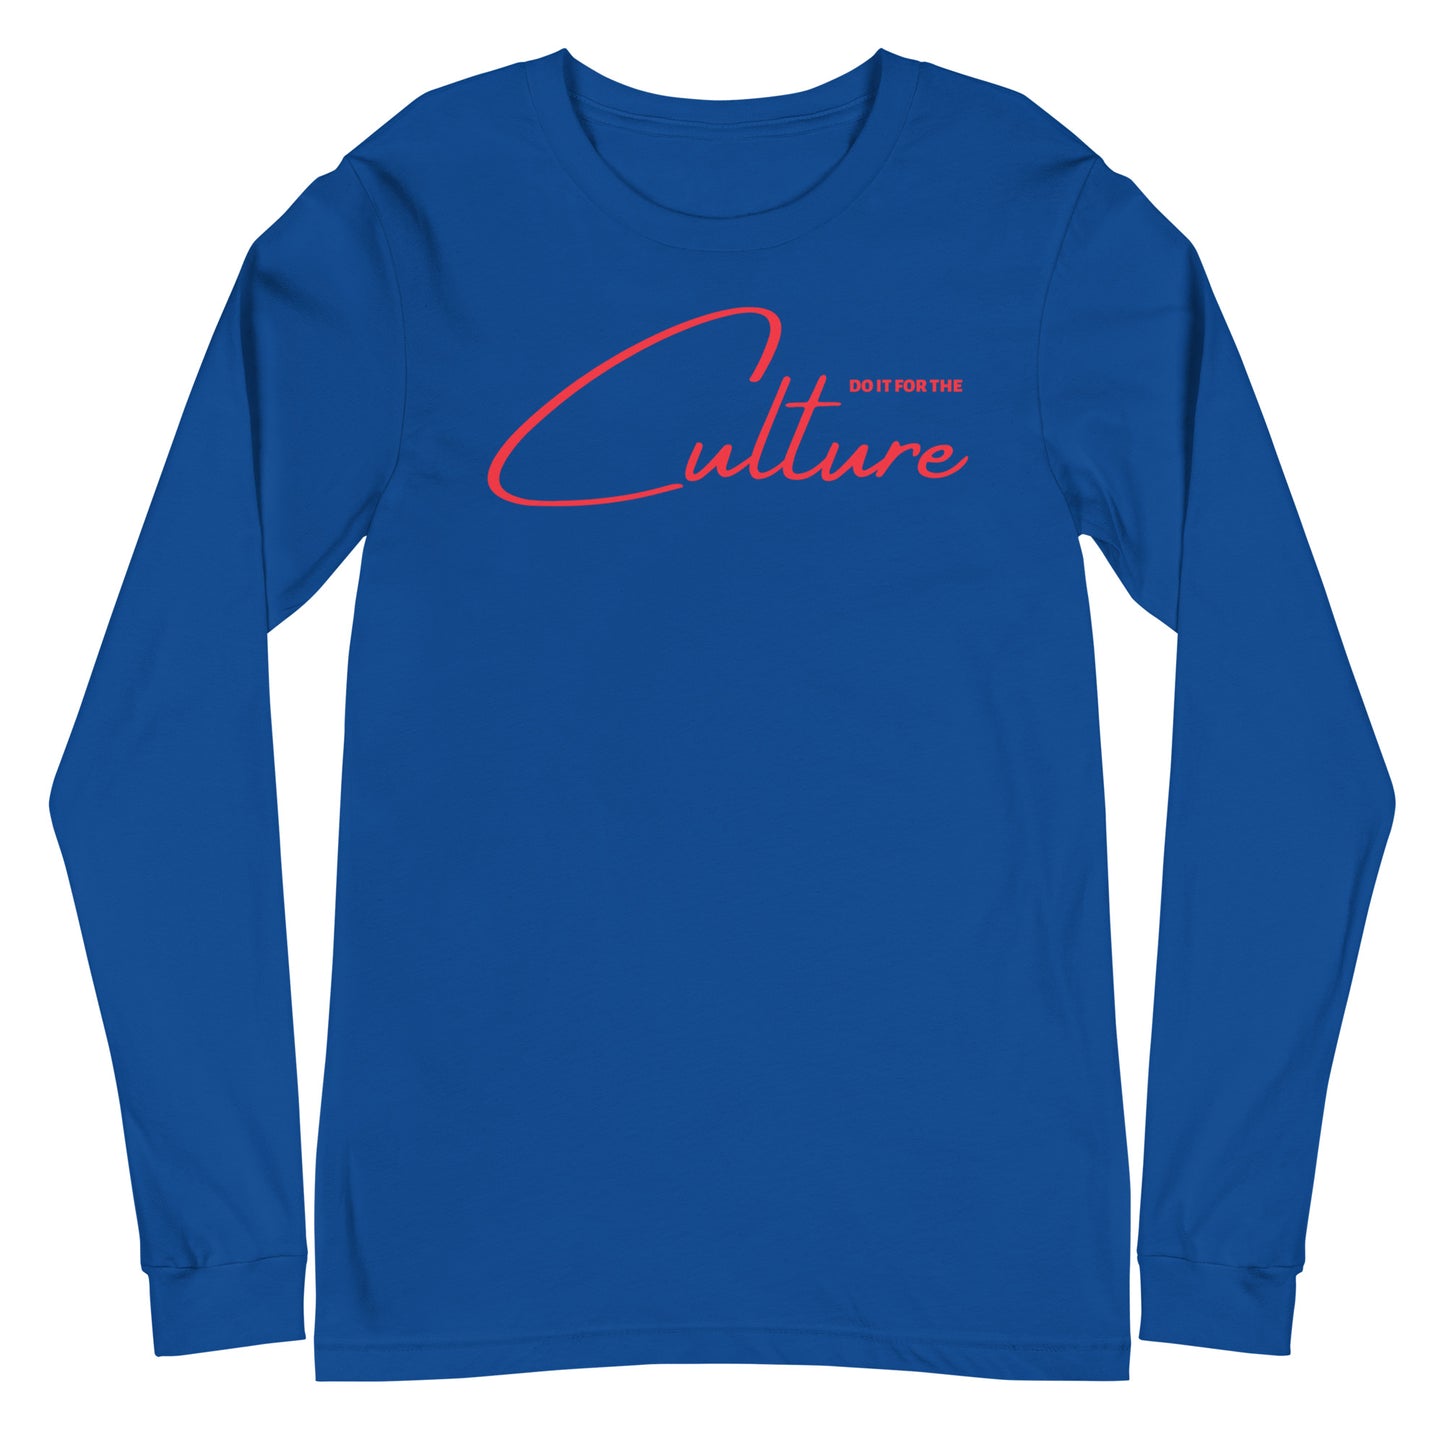 Do it for the Culture Unisex Long Sleeve Tee